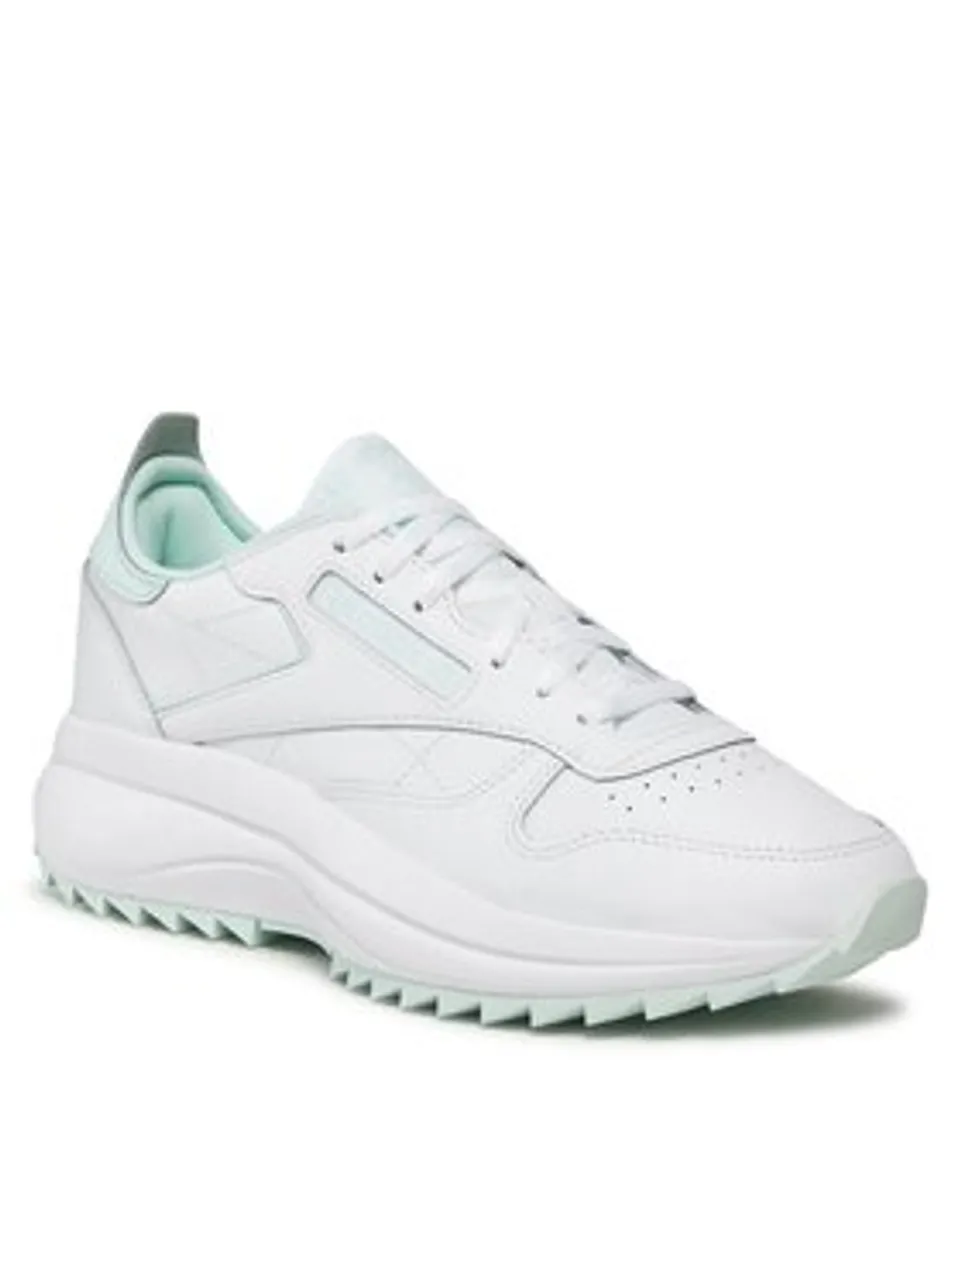 Reebok Sneakers Classic Leather Sp Extra IE5010 Weiß